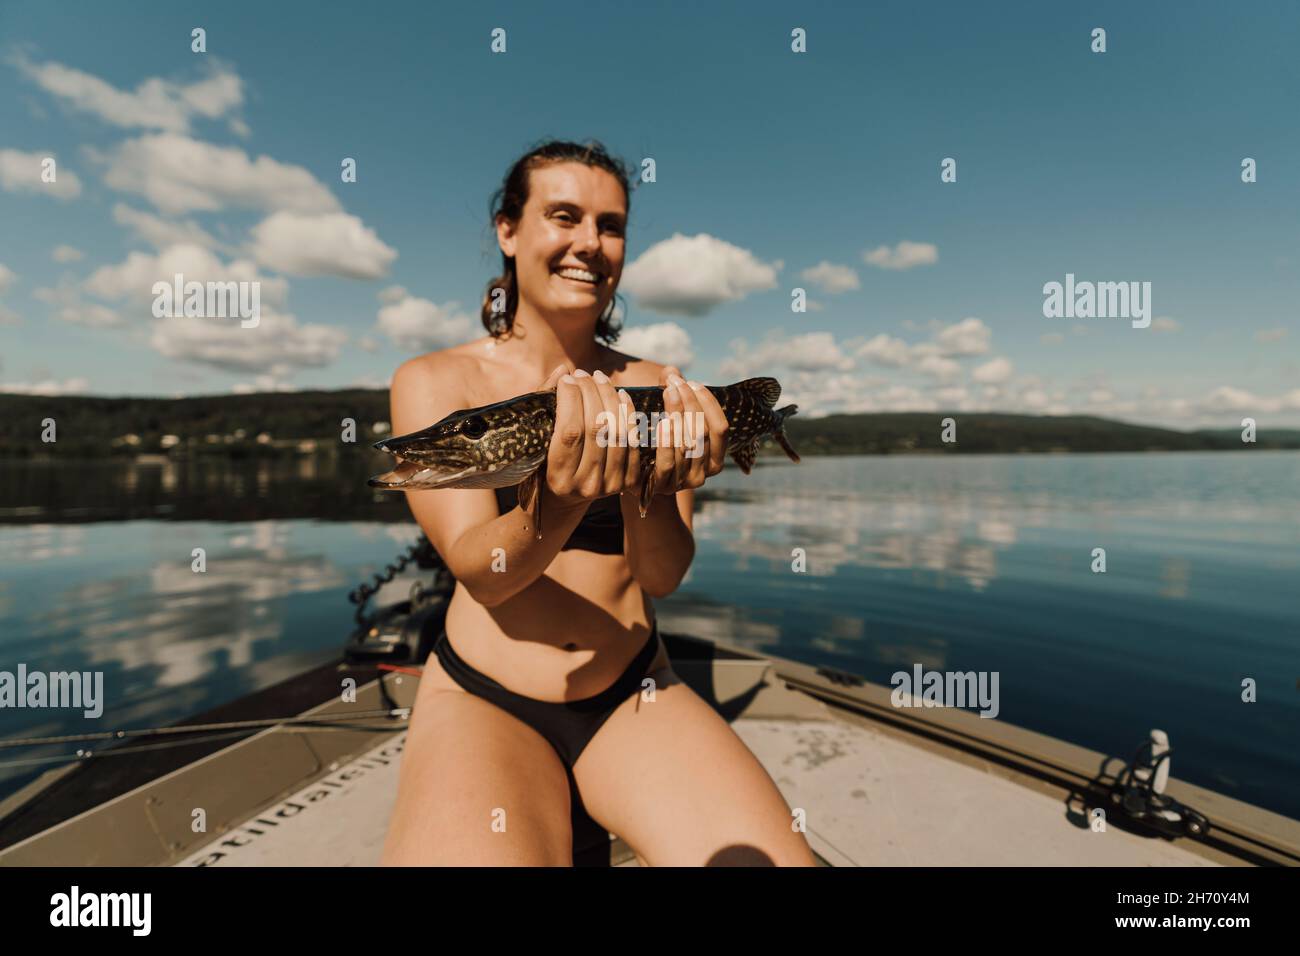 Smiling woman on boat holding fish Stock Photo